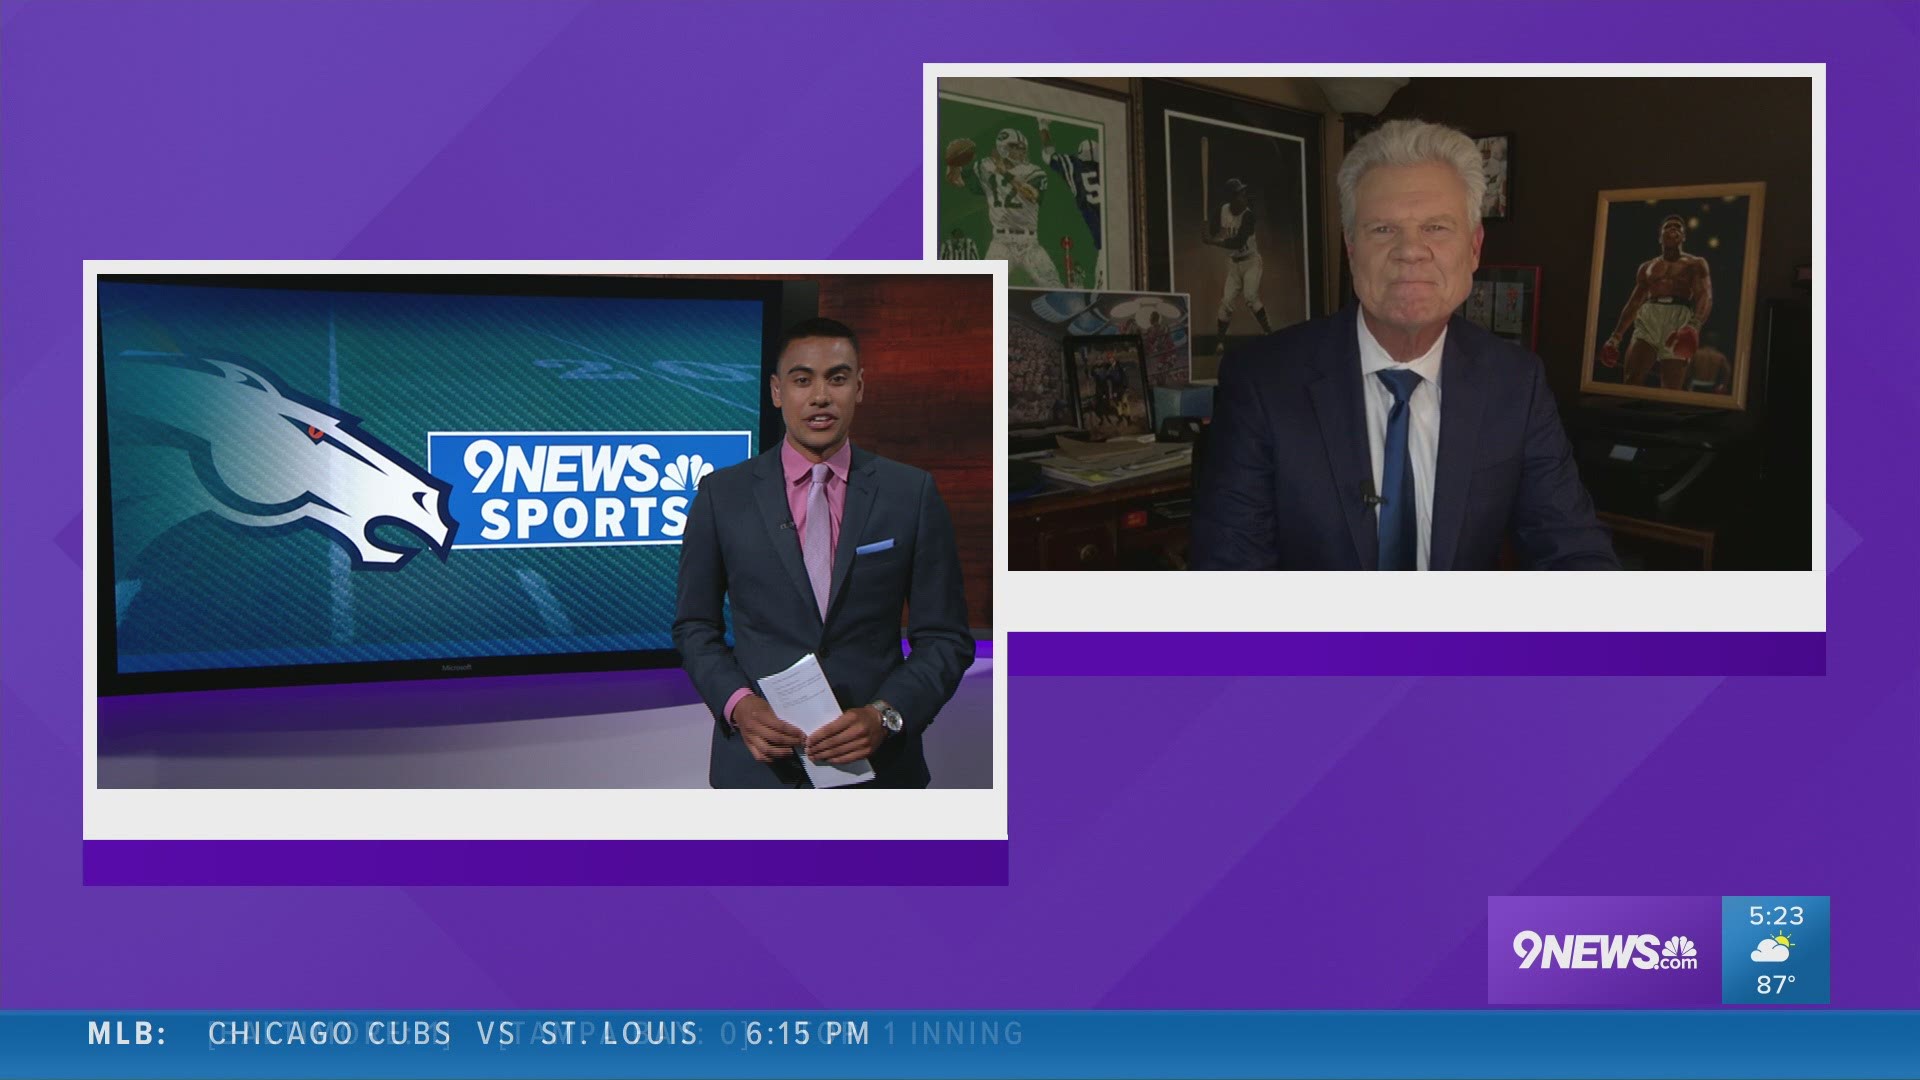 Klis joined 9NEWS sports anchor Jacob Tobey to discuss Aaron Rodgers, Von Miller, Courtland Sutton, John Elway and more.